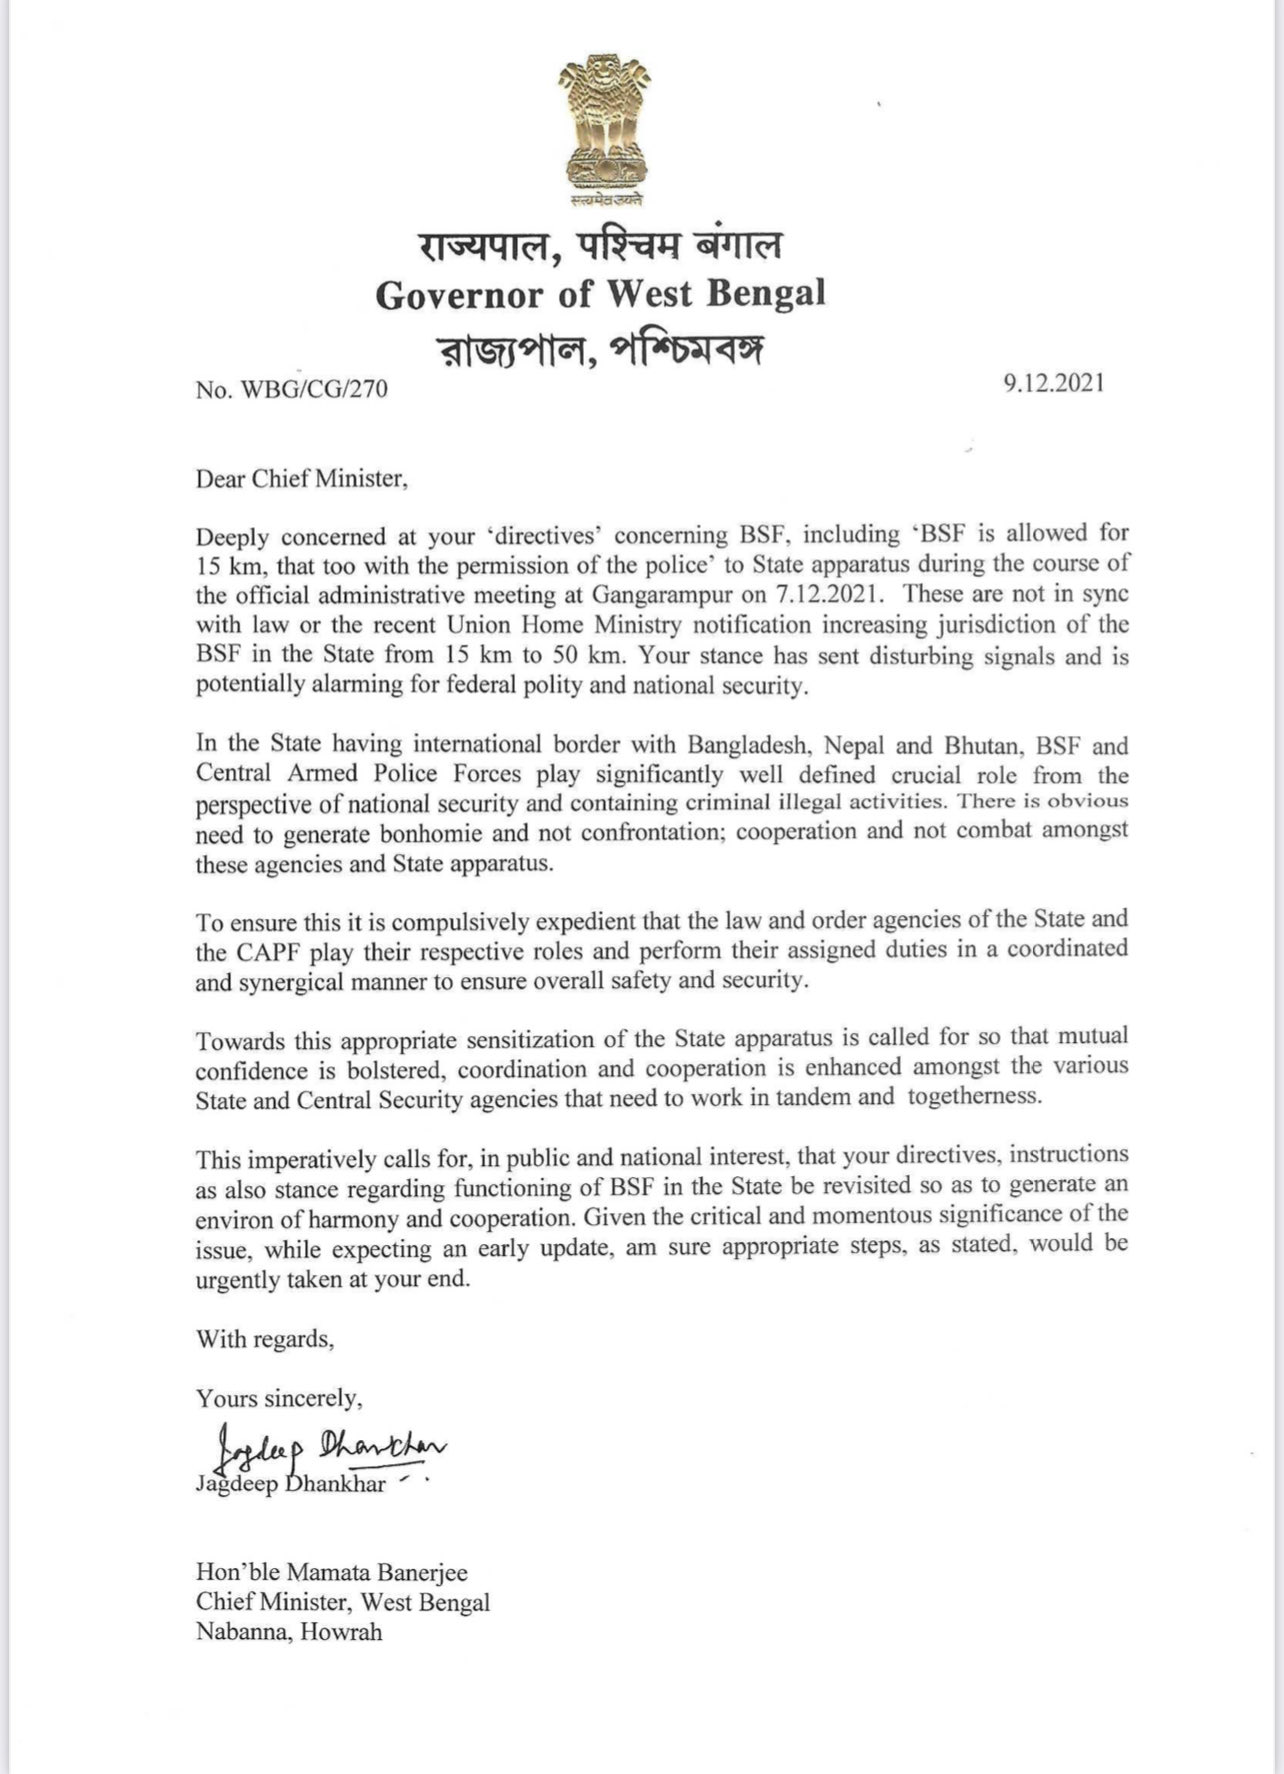 wb governor jagdeep dhaknhar writes to cm mamata banerjee about bsf issue